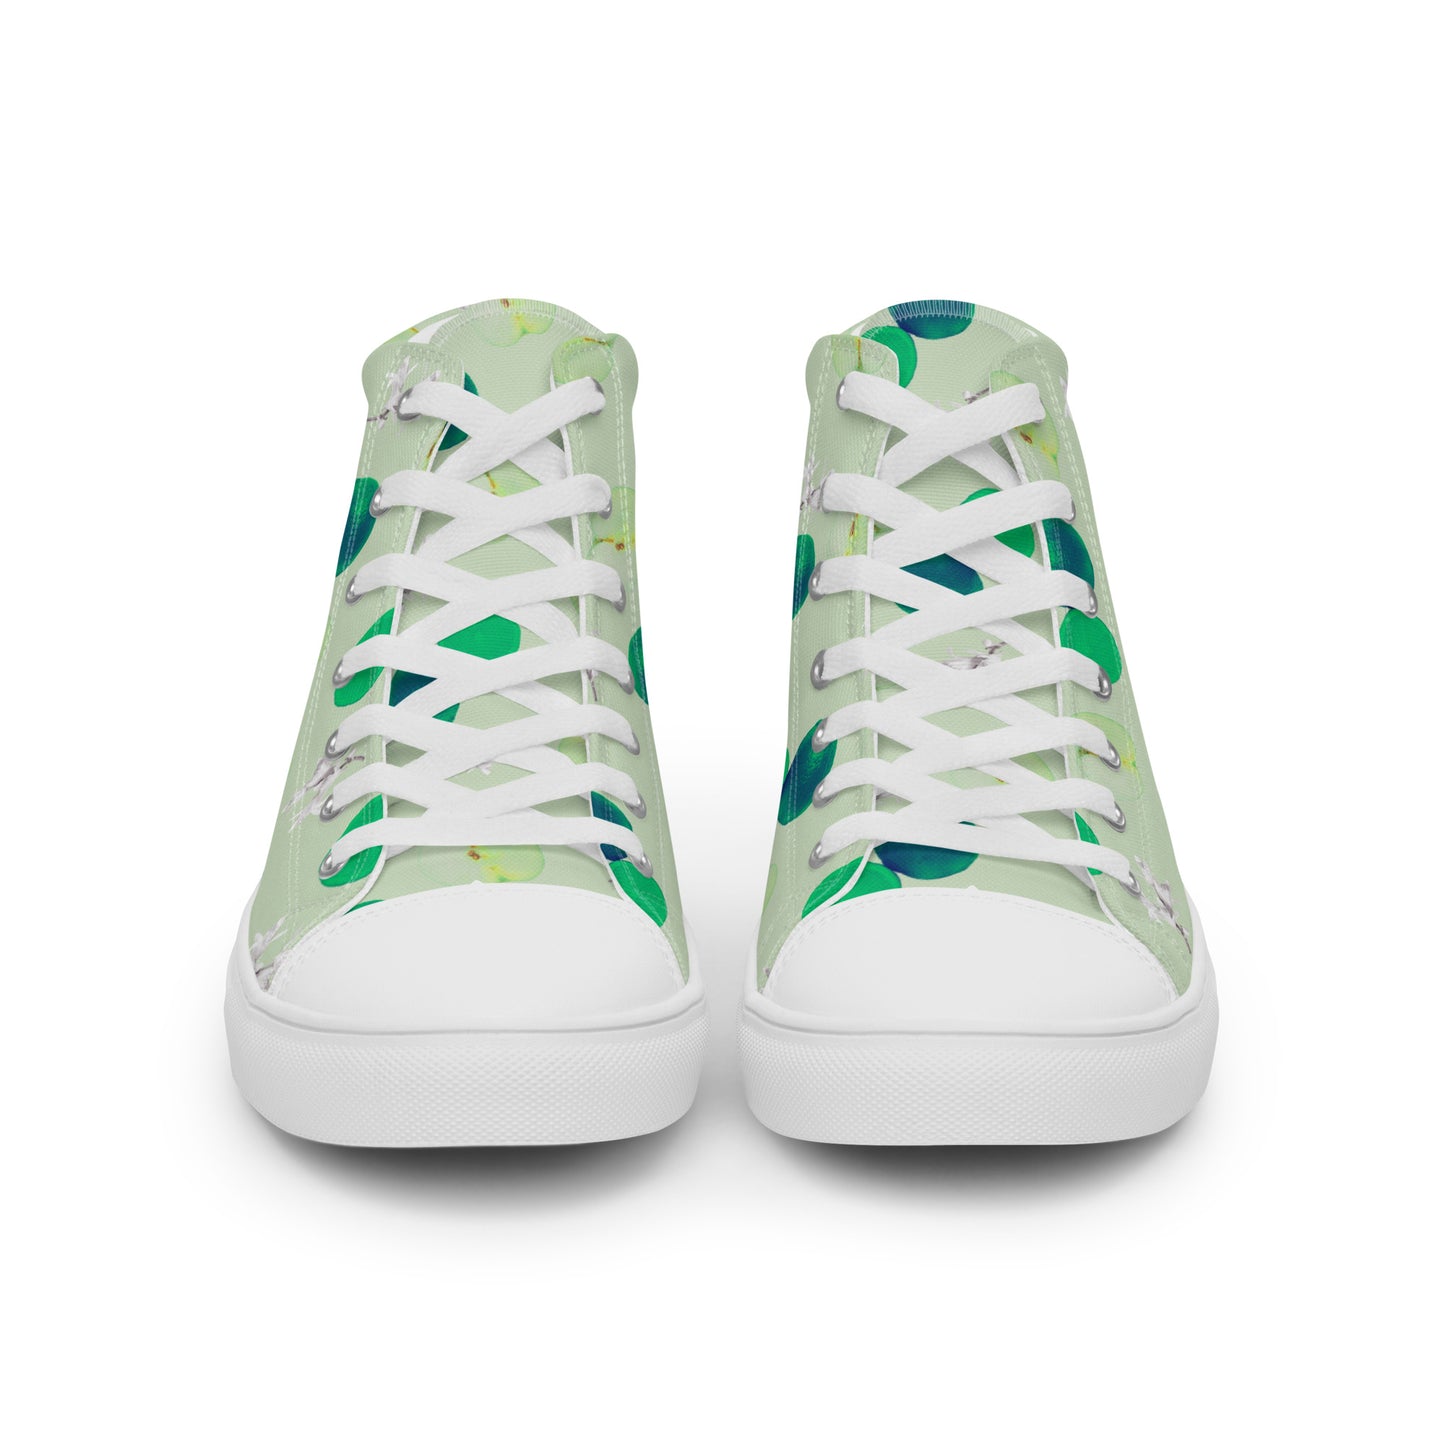 Women’s high top canvas Riesling shoes